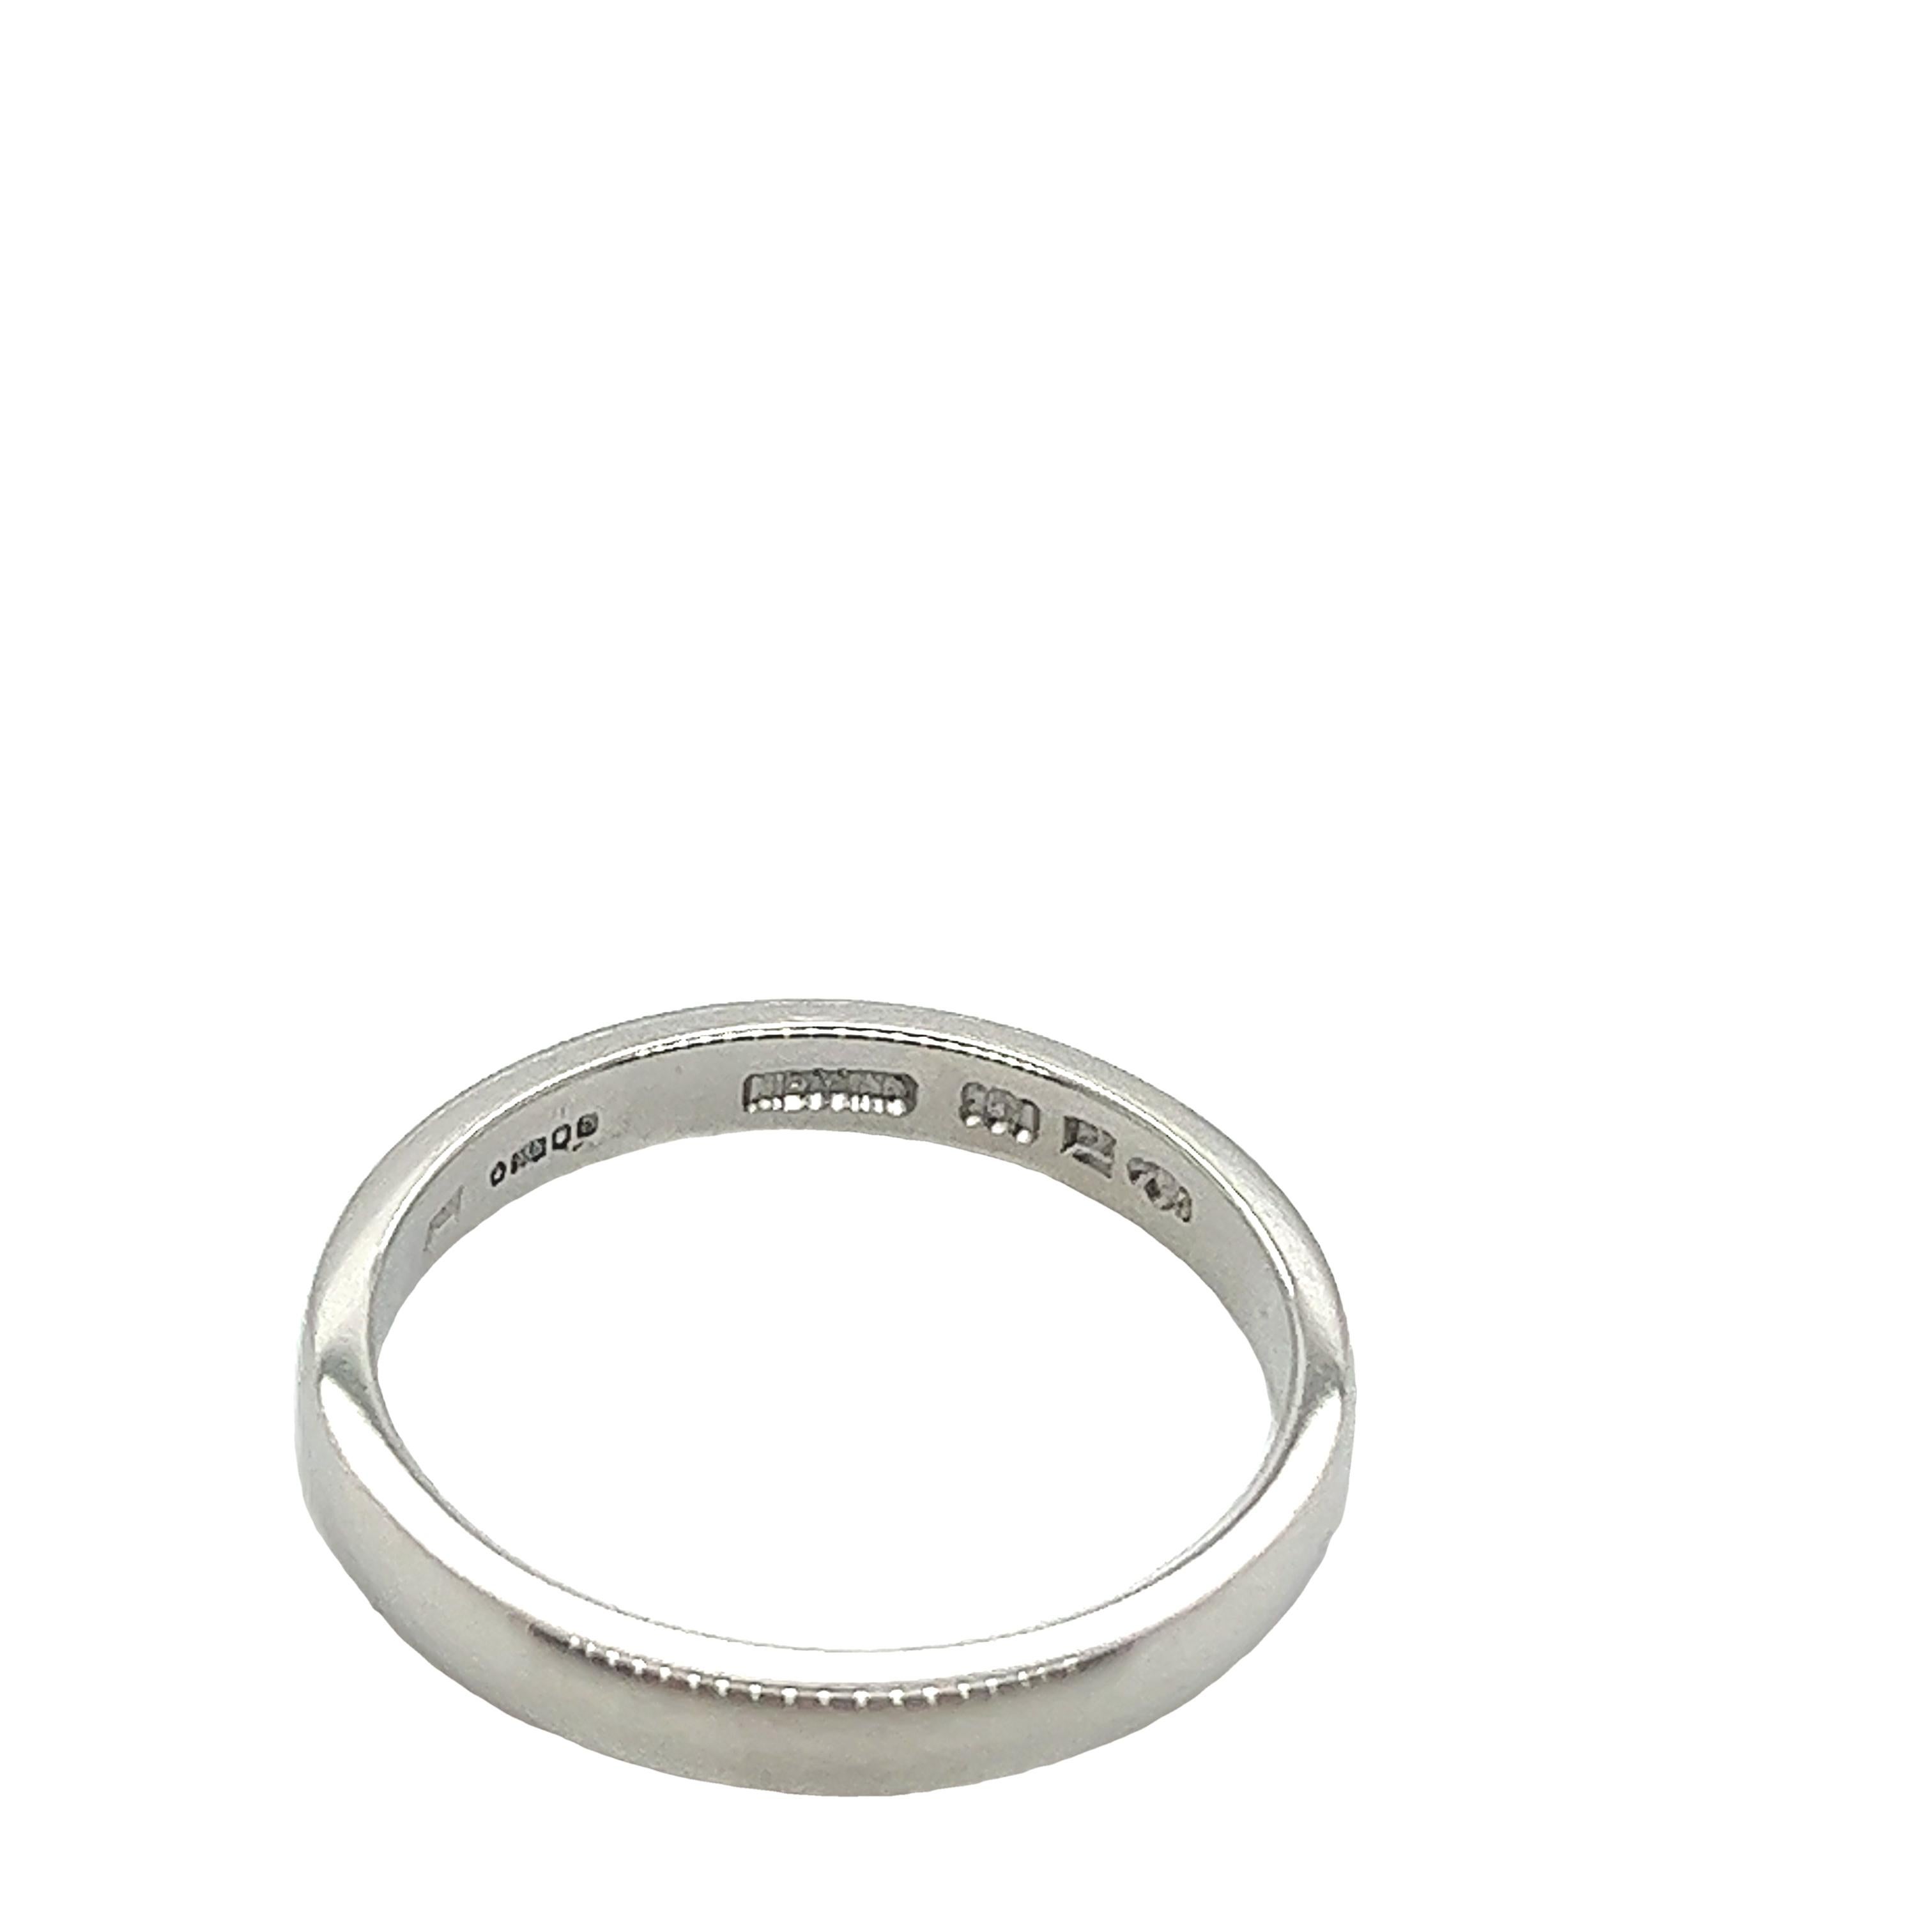 This 2.40mm wedding band is set in platinum with a shiny finish.
Width of Band: 2.40mm
Total Weight: 3.3g
Ring Size: K
SMS8737